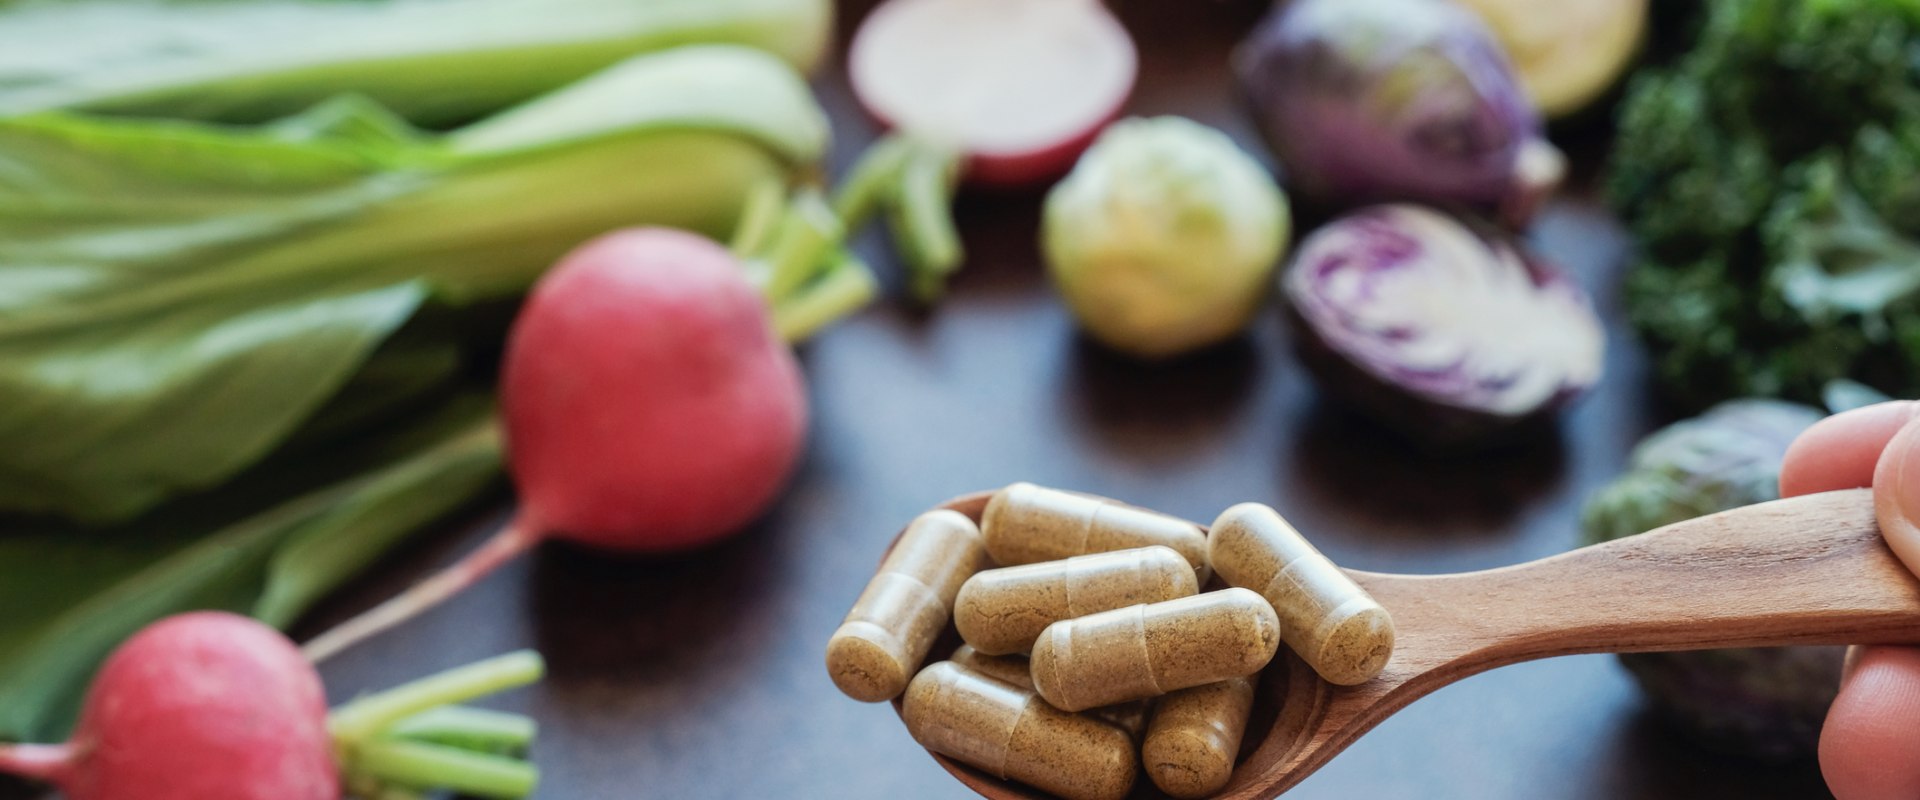 The Best Way to Take Health Supplements: What You Need to Know